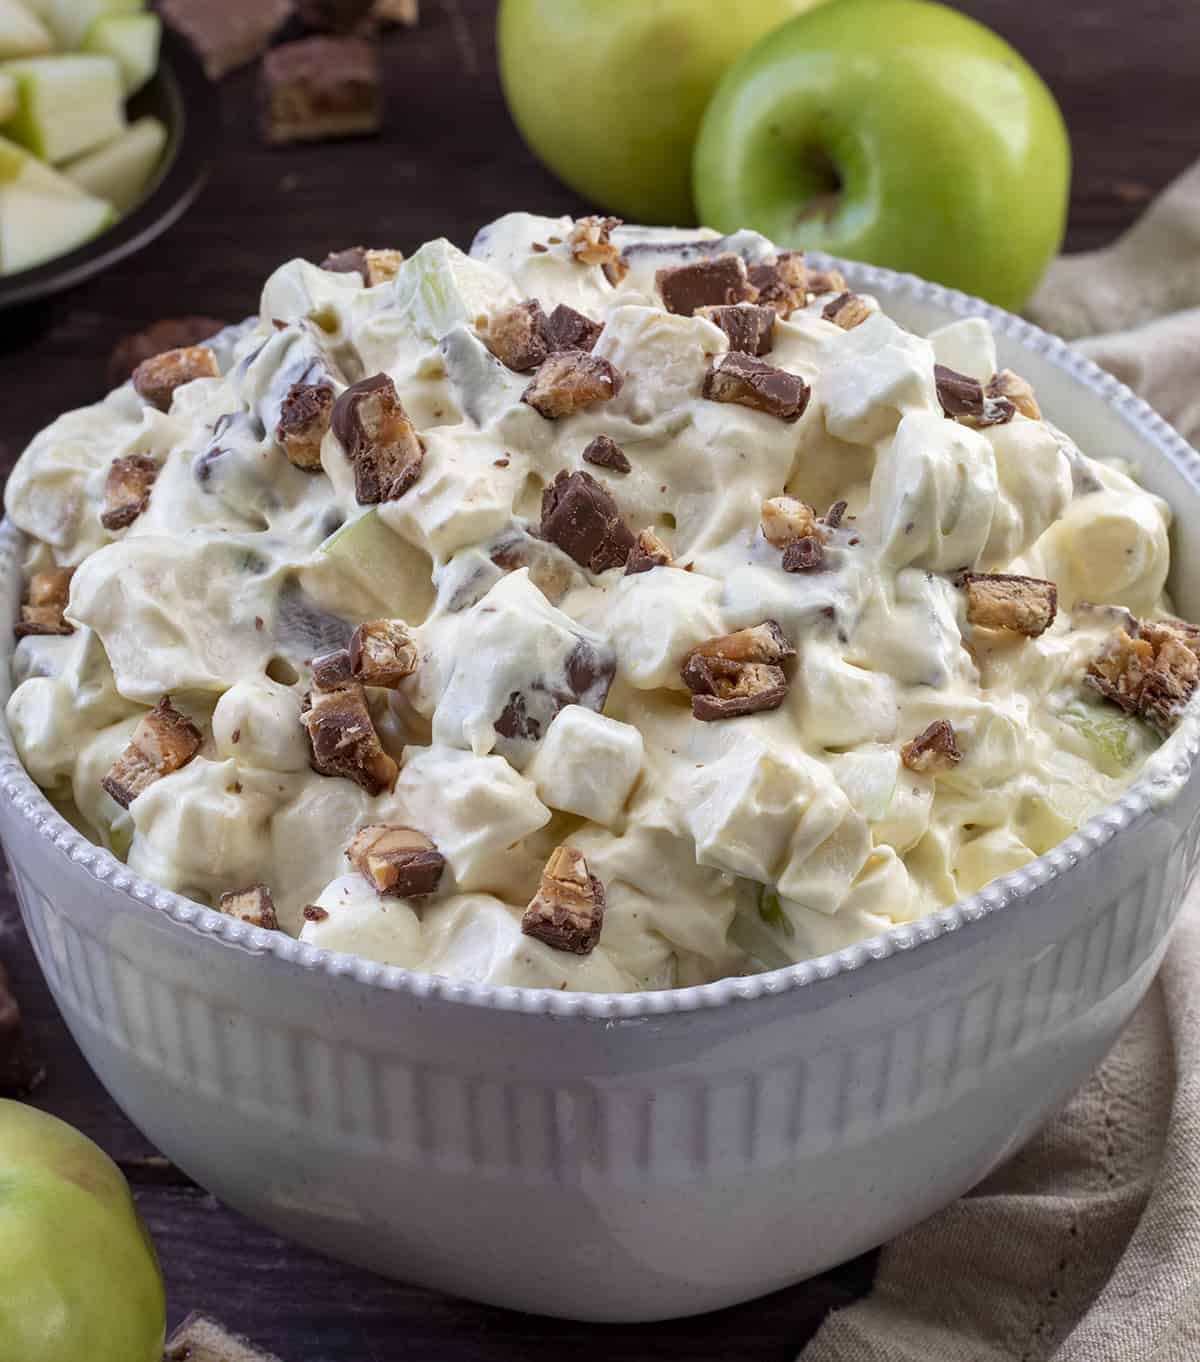 Bowl of Snickers Candy Salad with Apples Around It. Dessert, Summer Salads, Midwestern Salad, Candy Apple Salad, Fluff Salads, Whipped Cream Salads, BBQ Salad, i am baker, iambaker